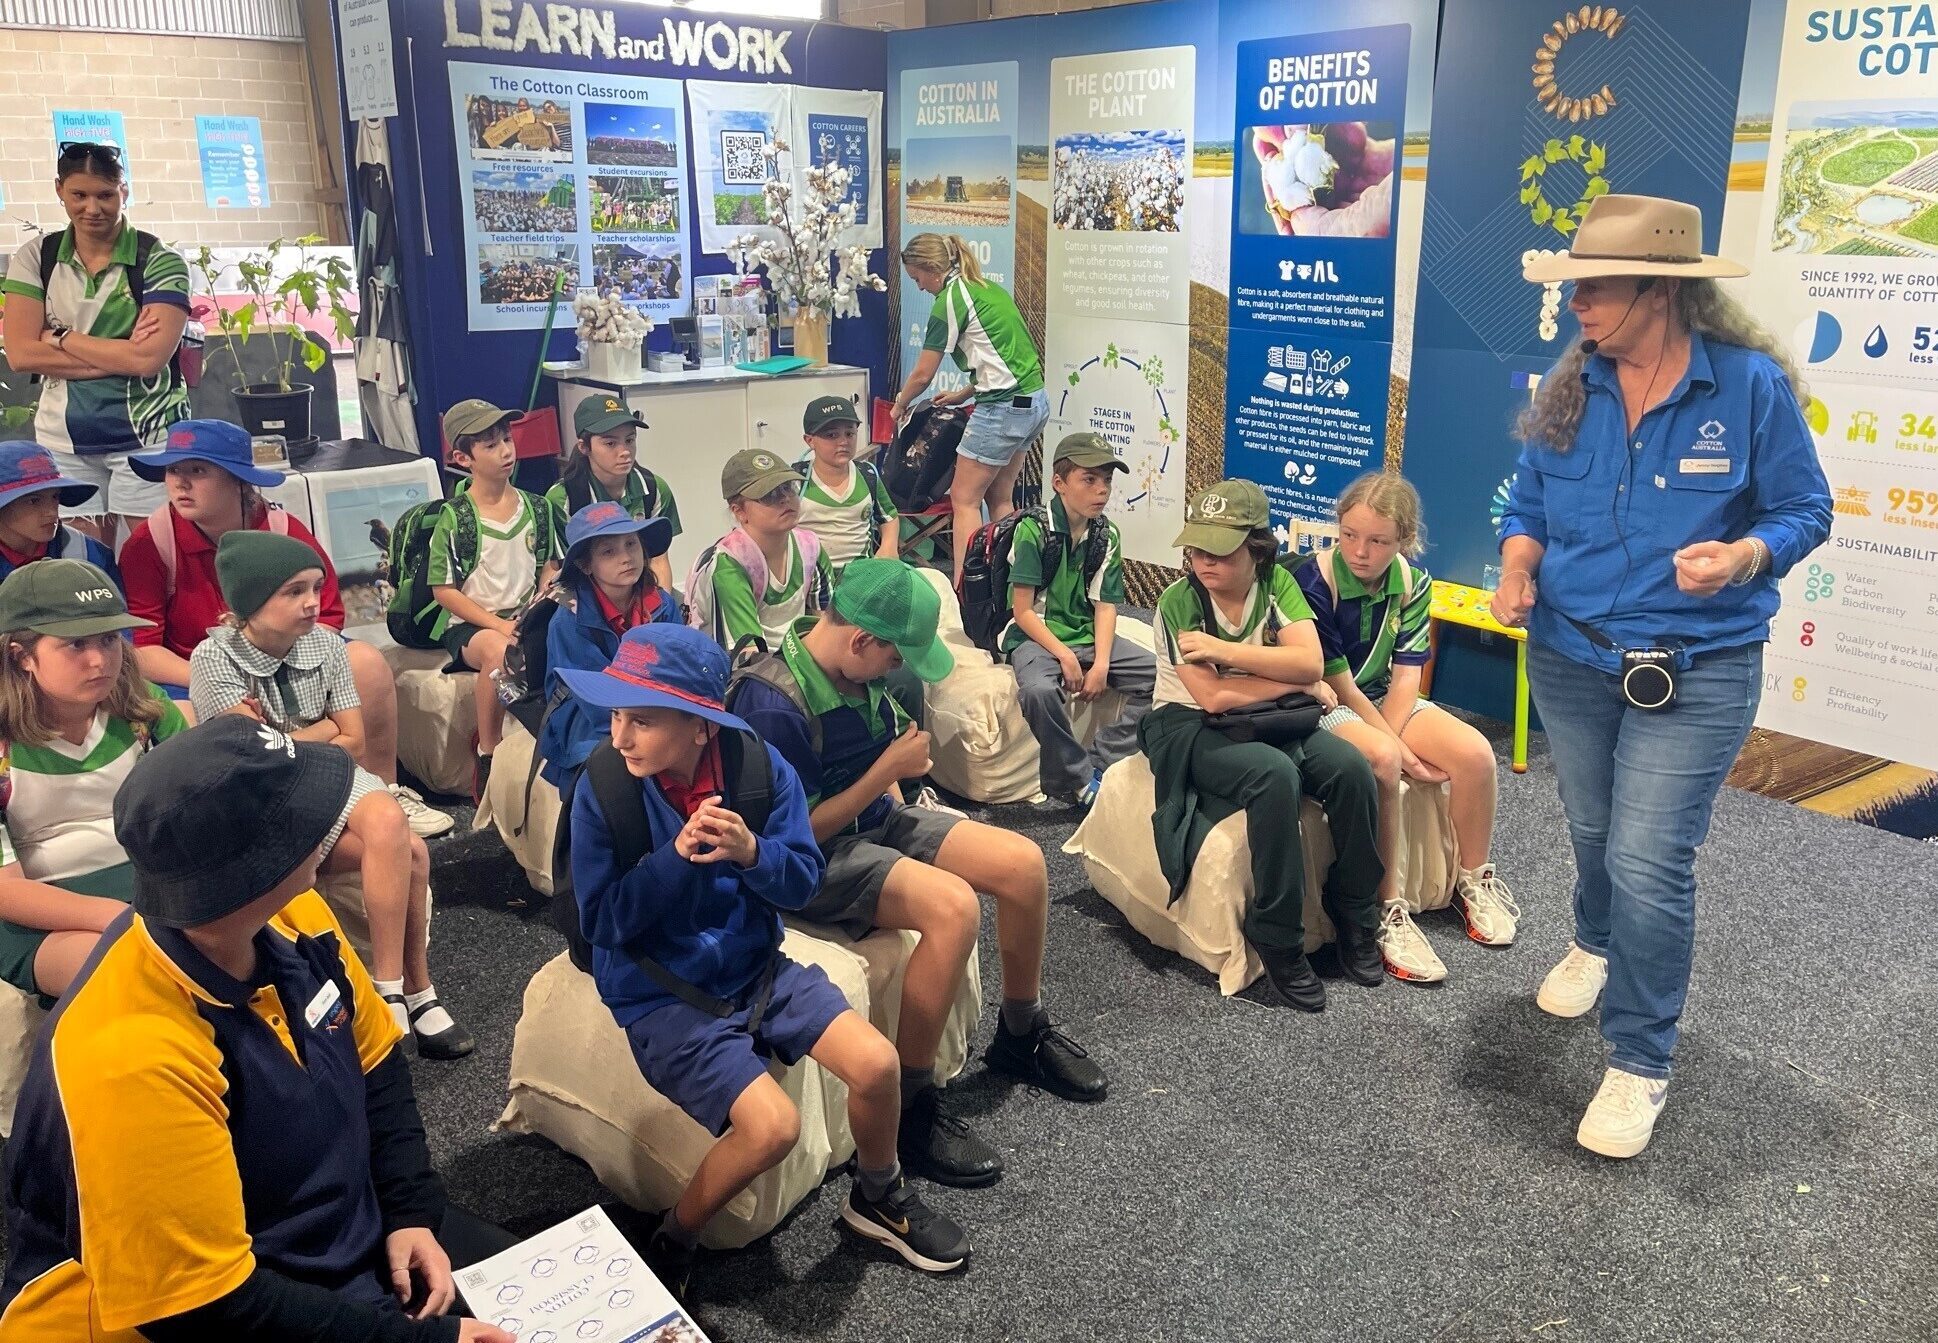 Primary Preview Day at the Sydney Royal Show